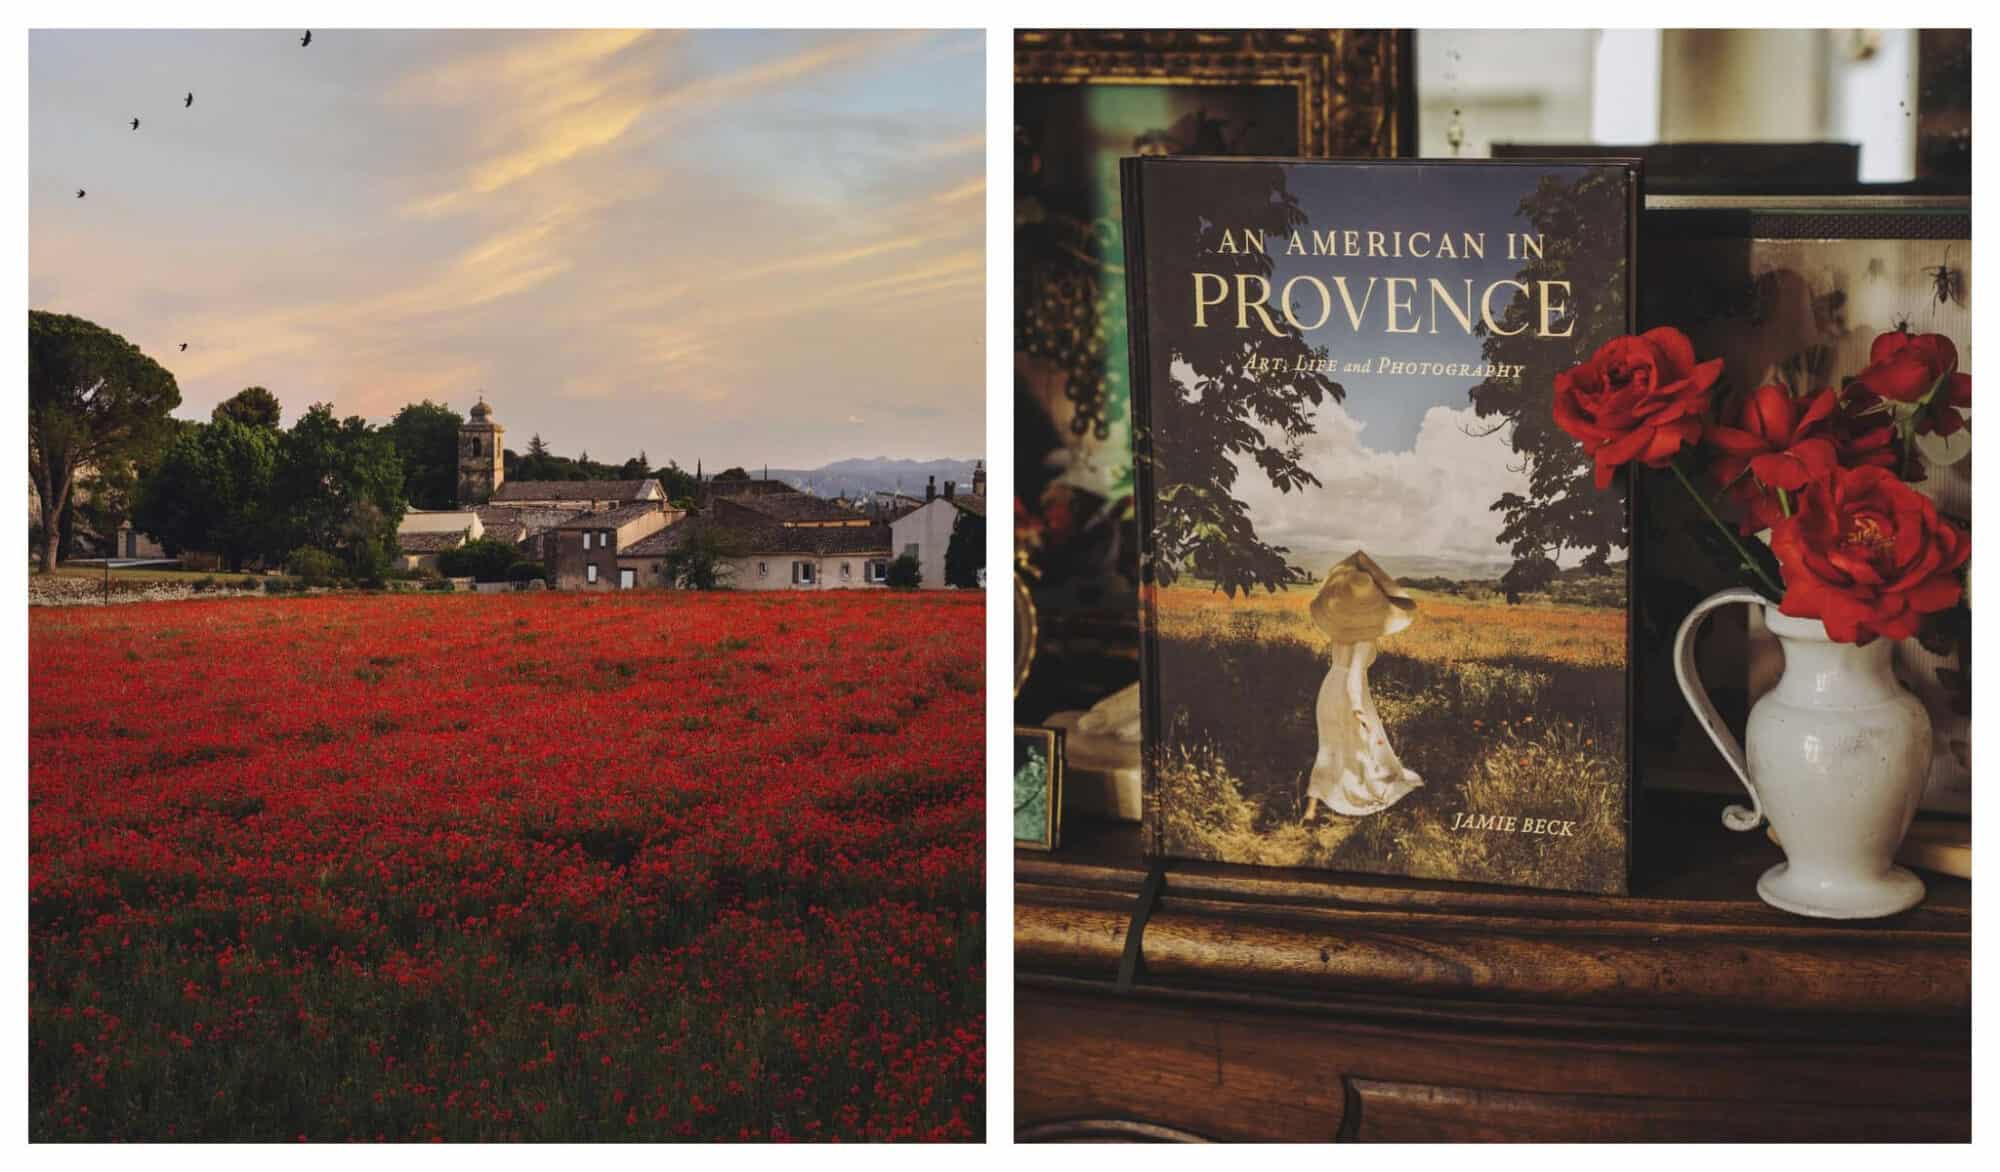 Left: a field of red poppies in Provence at sunset, Right: Jamie Beck's book An American in Provence' propped up on a wooden mantle